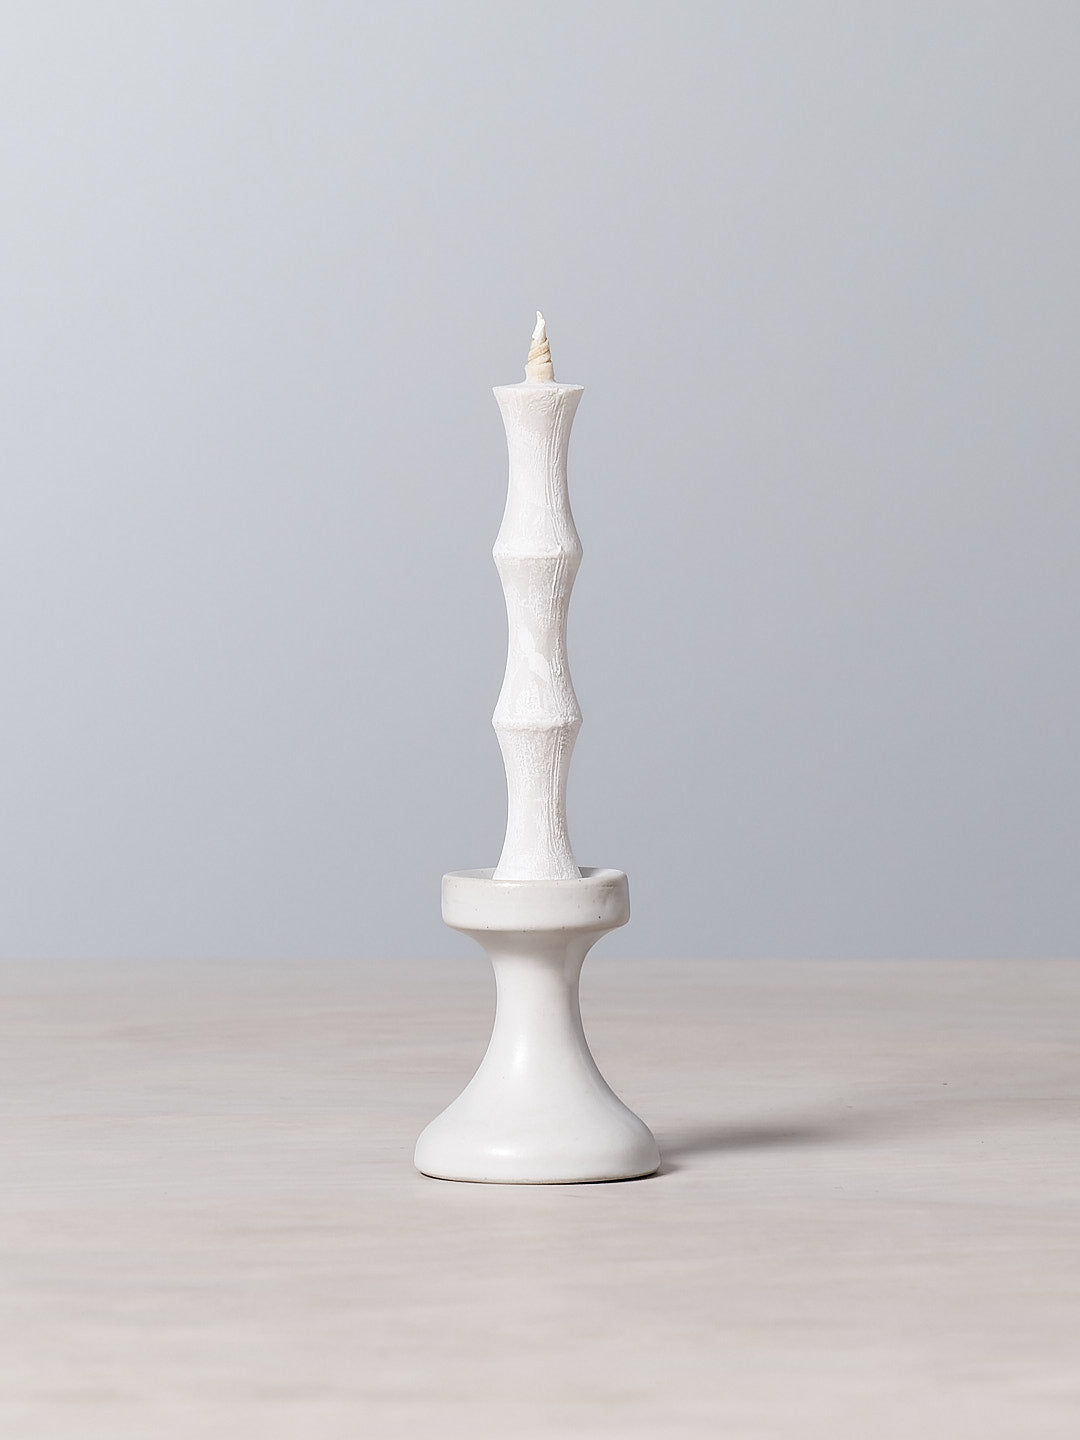 A FLUID – Stoneware Candle Holder by Takazawa is sitting on top of a stoneware table.